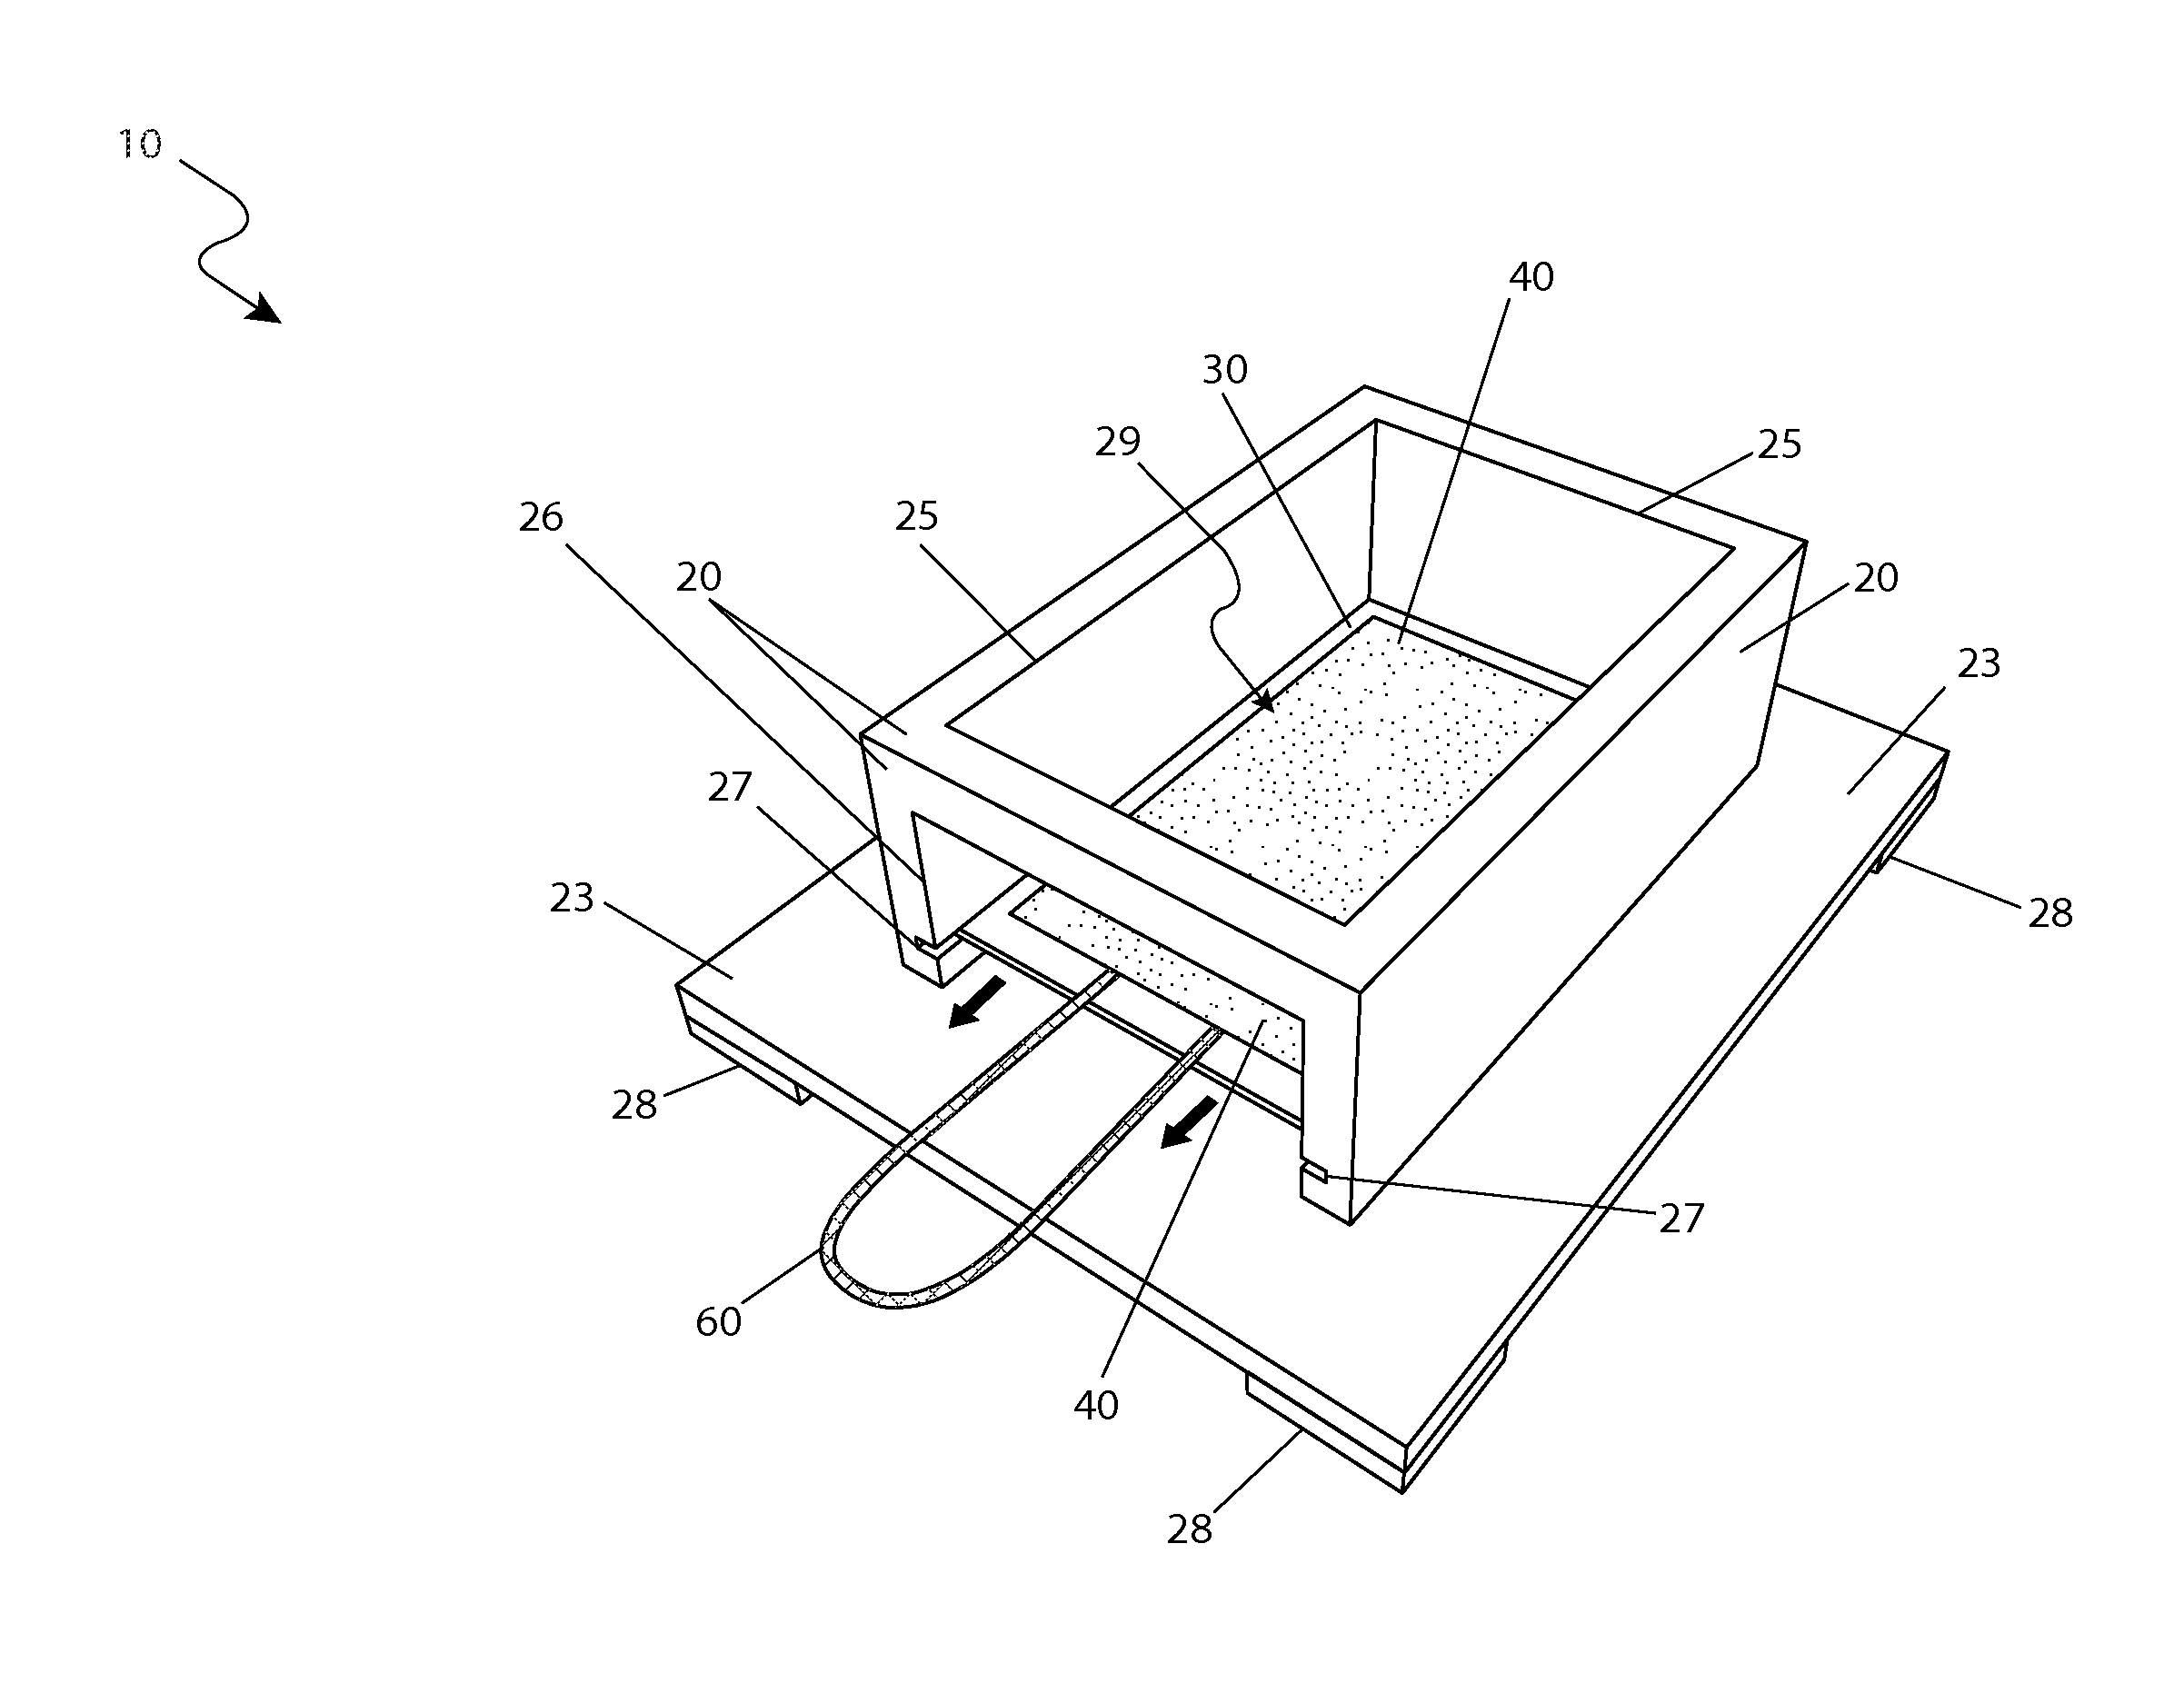 Insect capturing apparatus